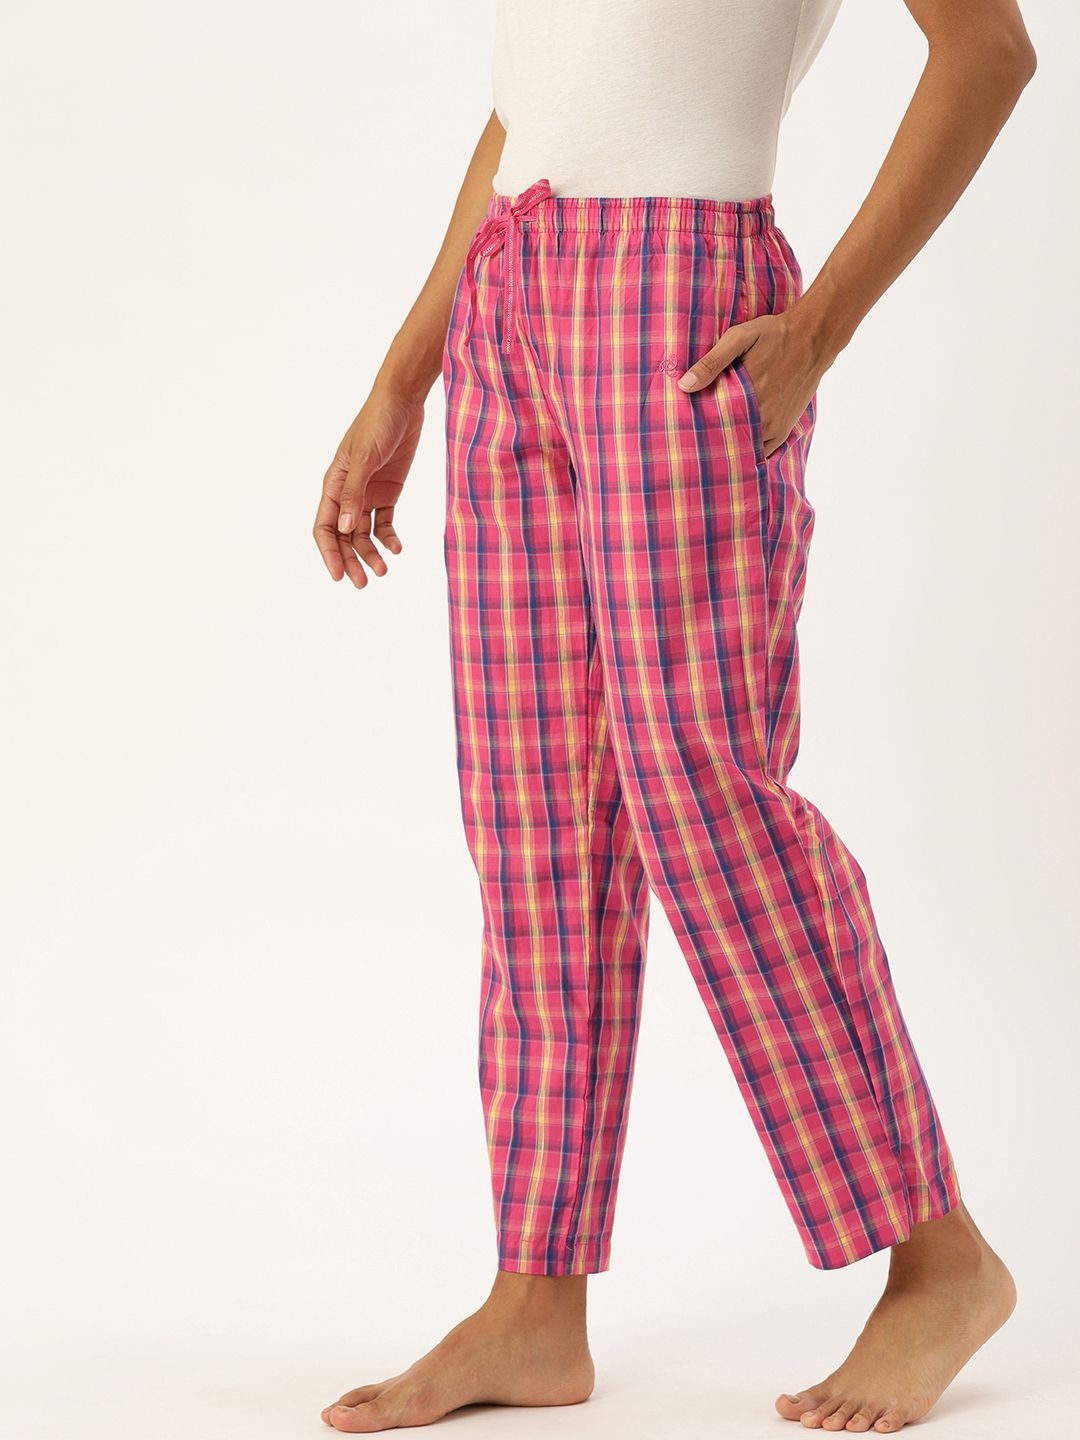 Jockey Woman's Pink and Blue Checked Lounge Pants Price in India